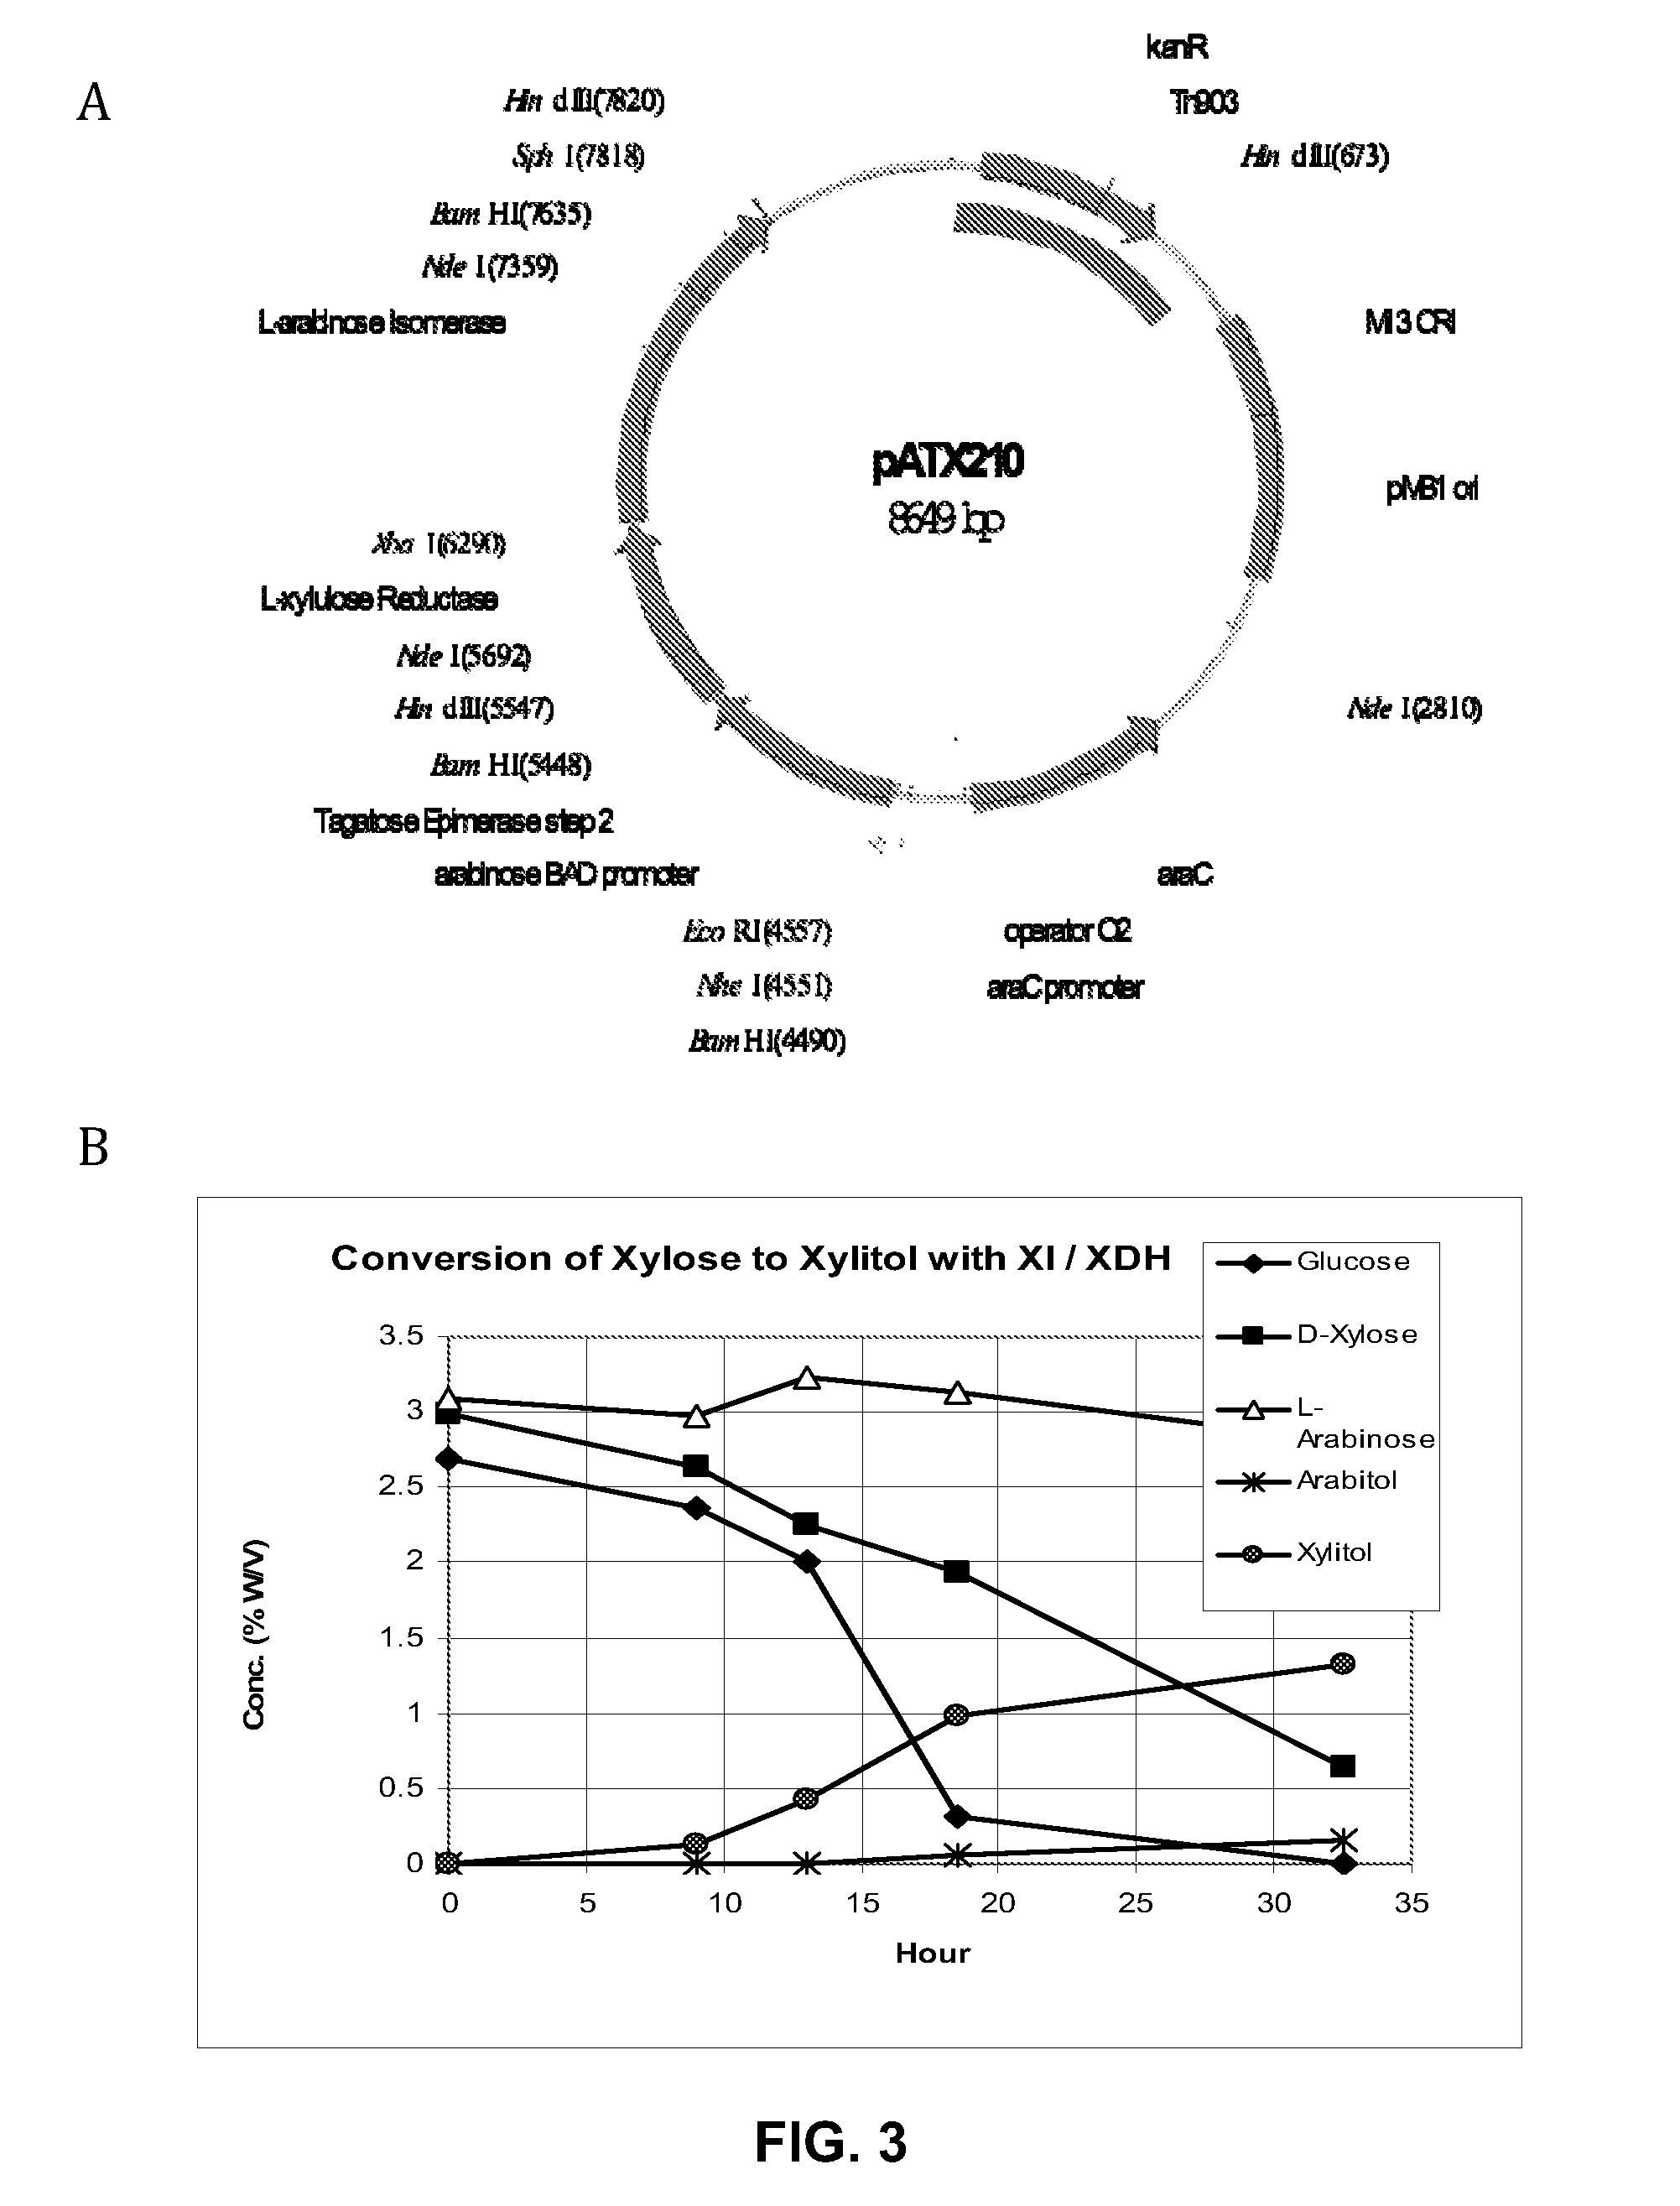 Production of xylitol from a mixture of hemicellulosic sugars